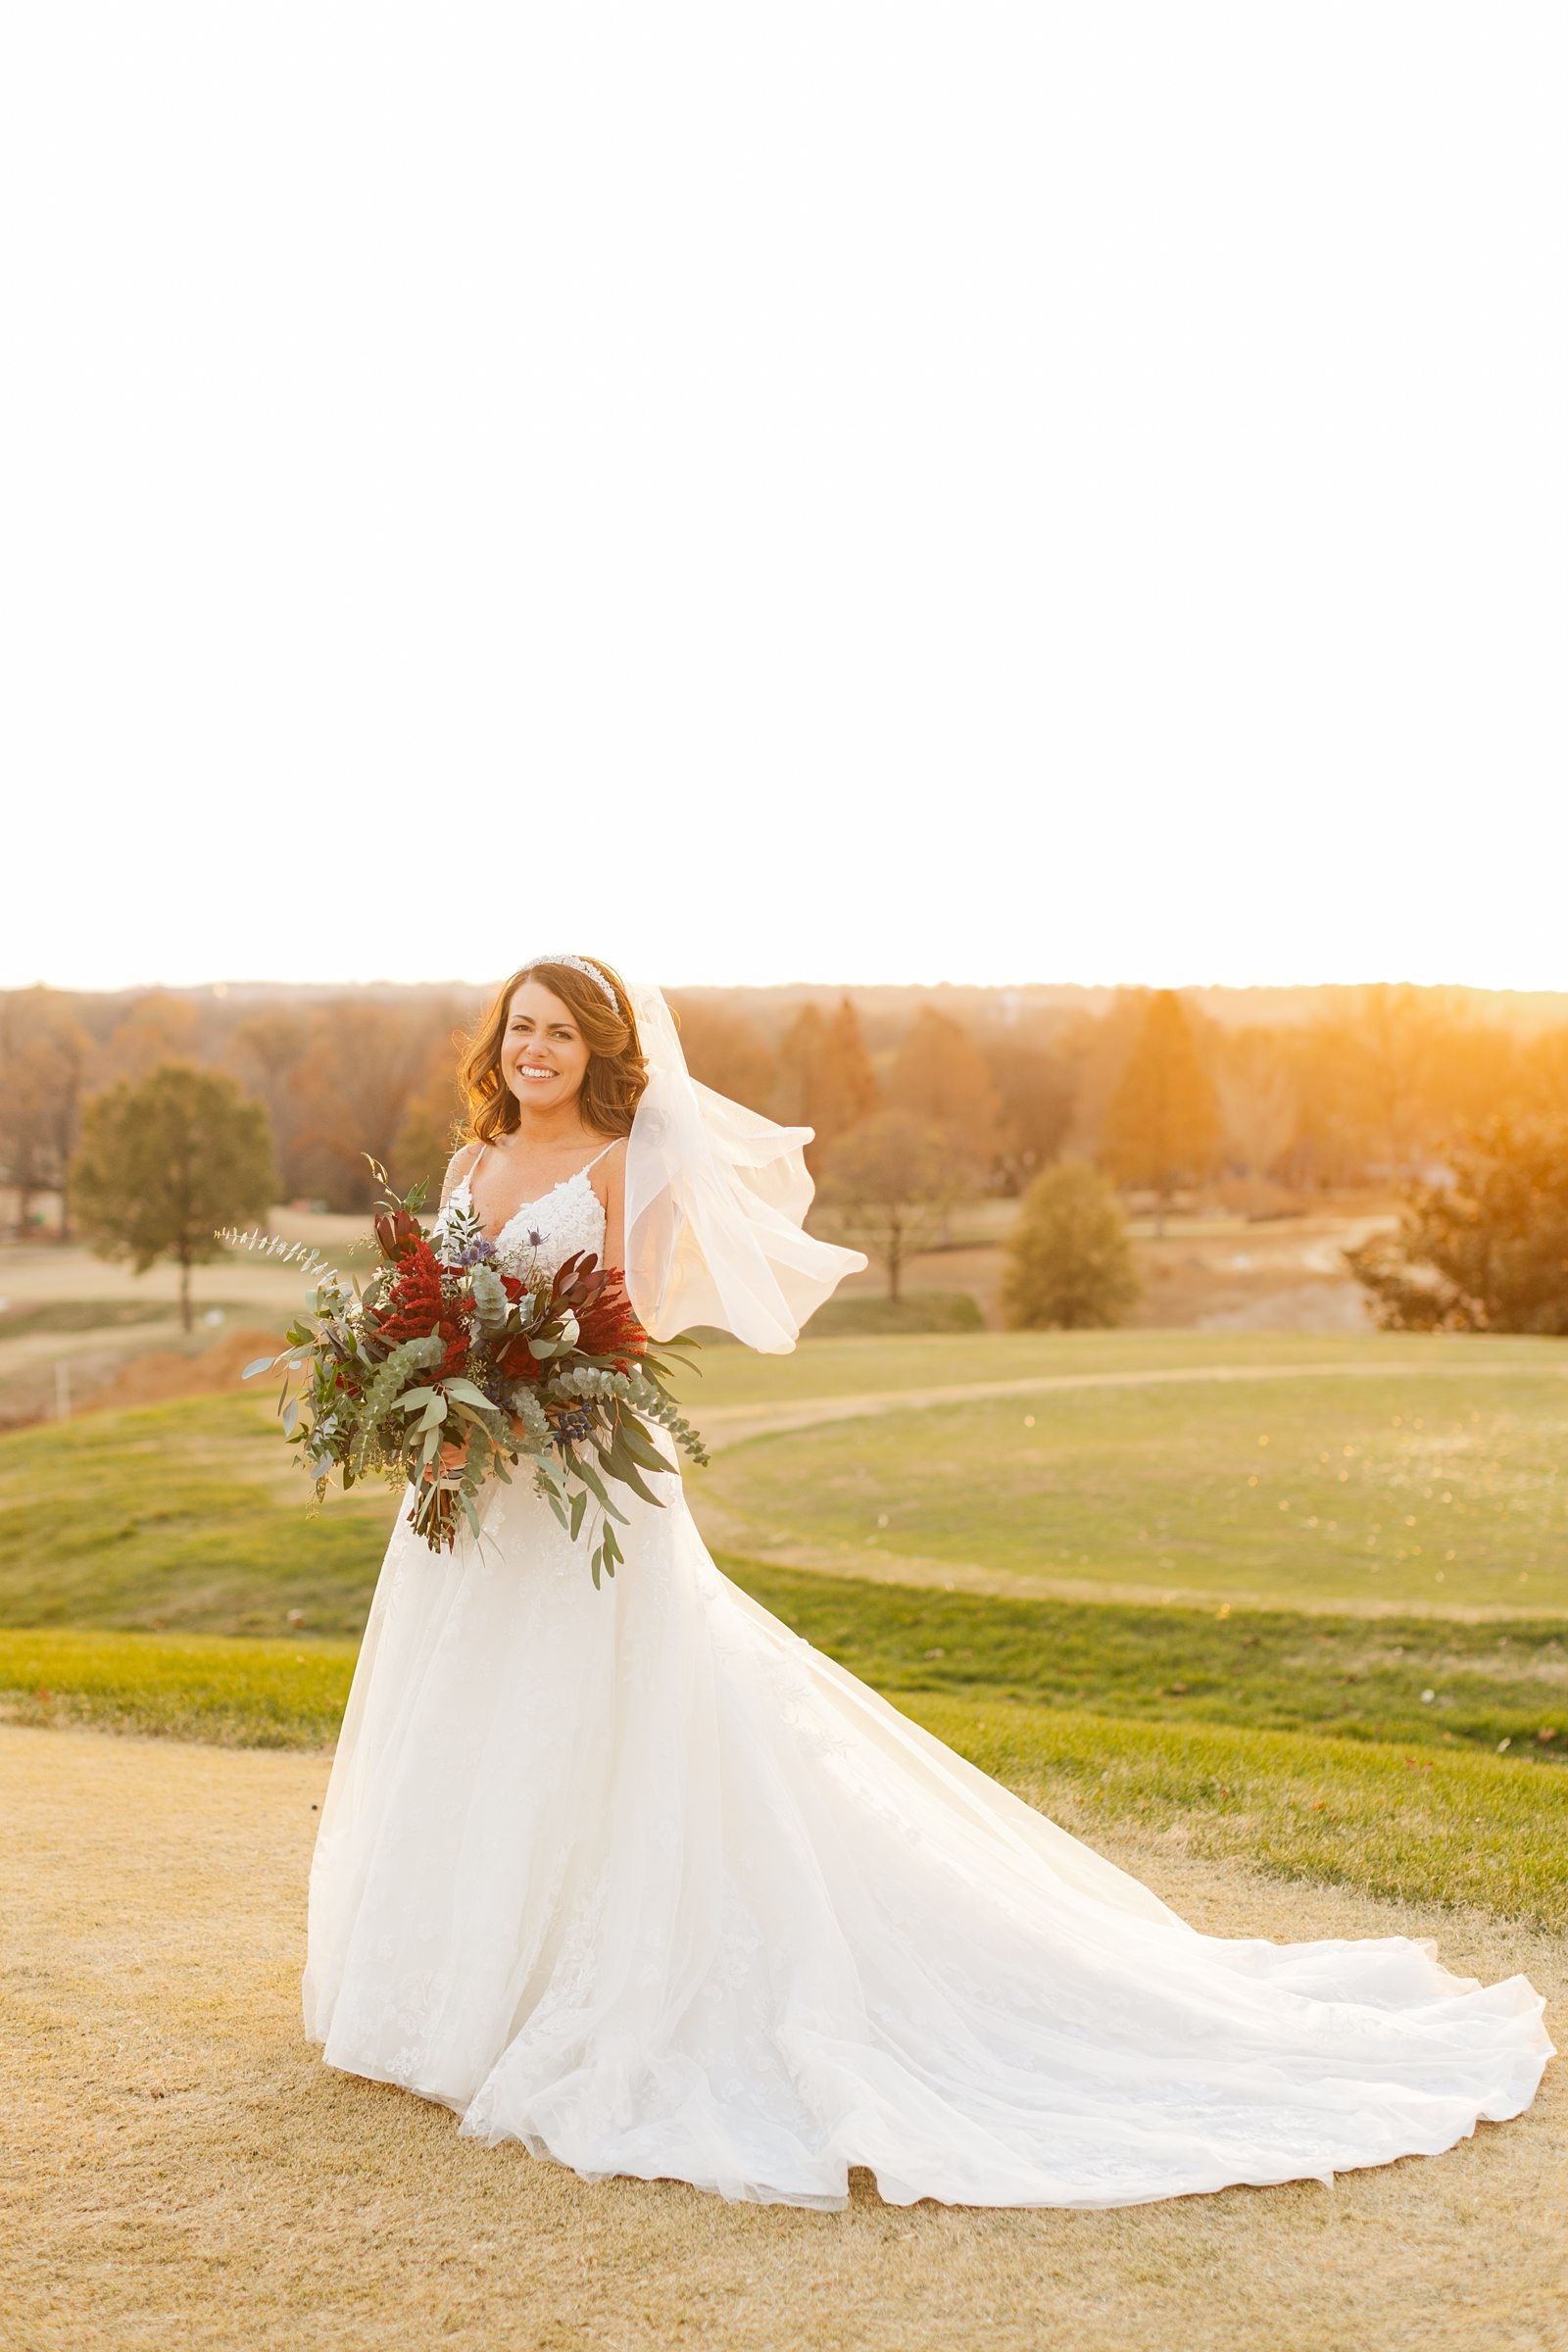 An Evansville Country Club Wedding | Abby and Wes | 155.jpg